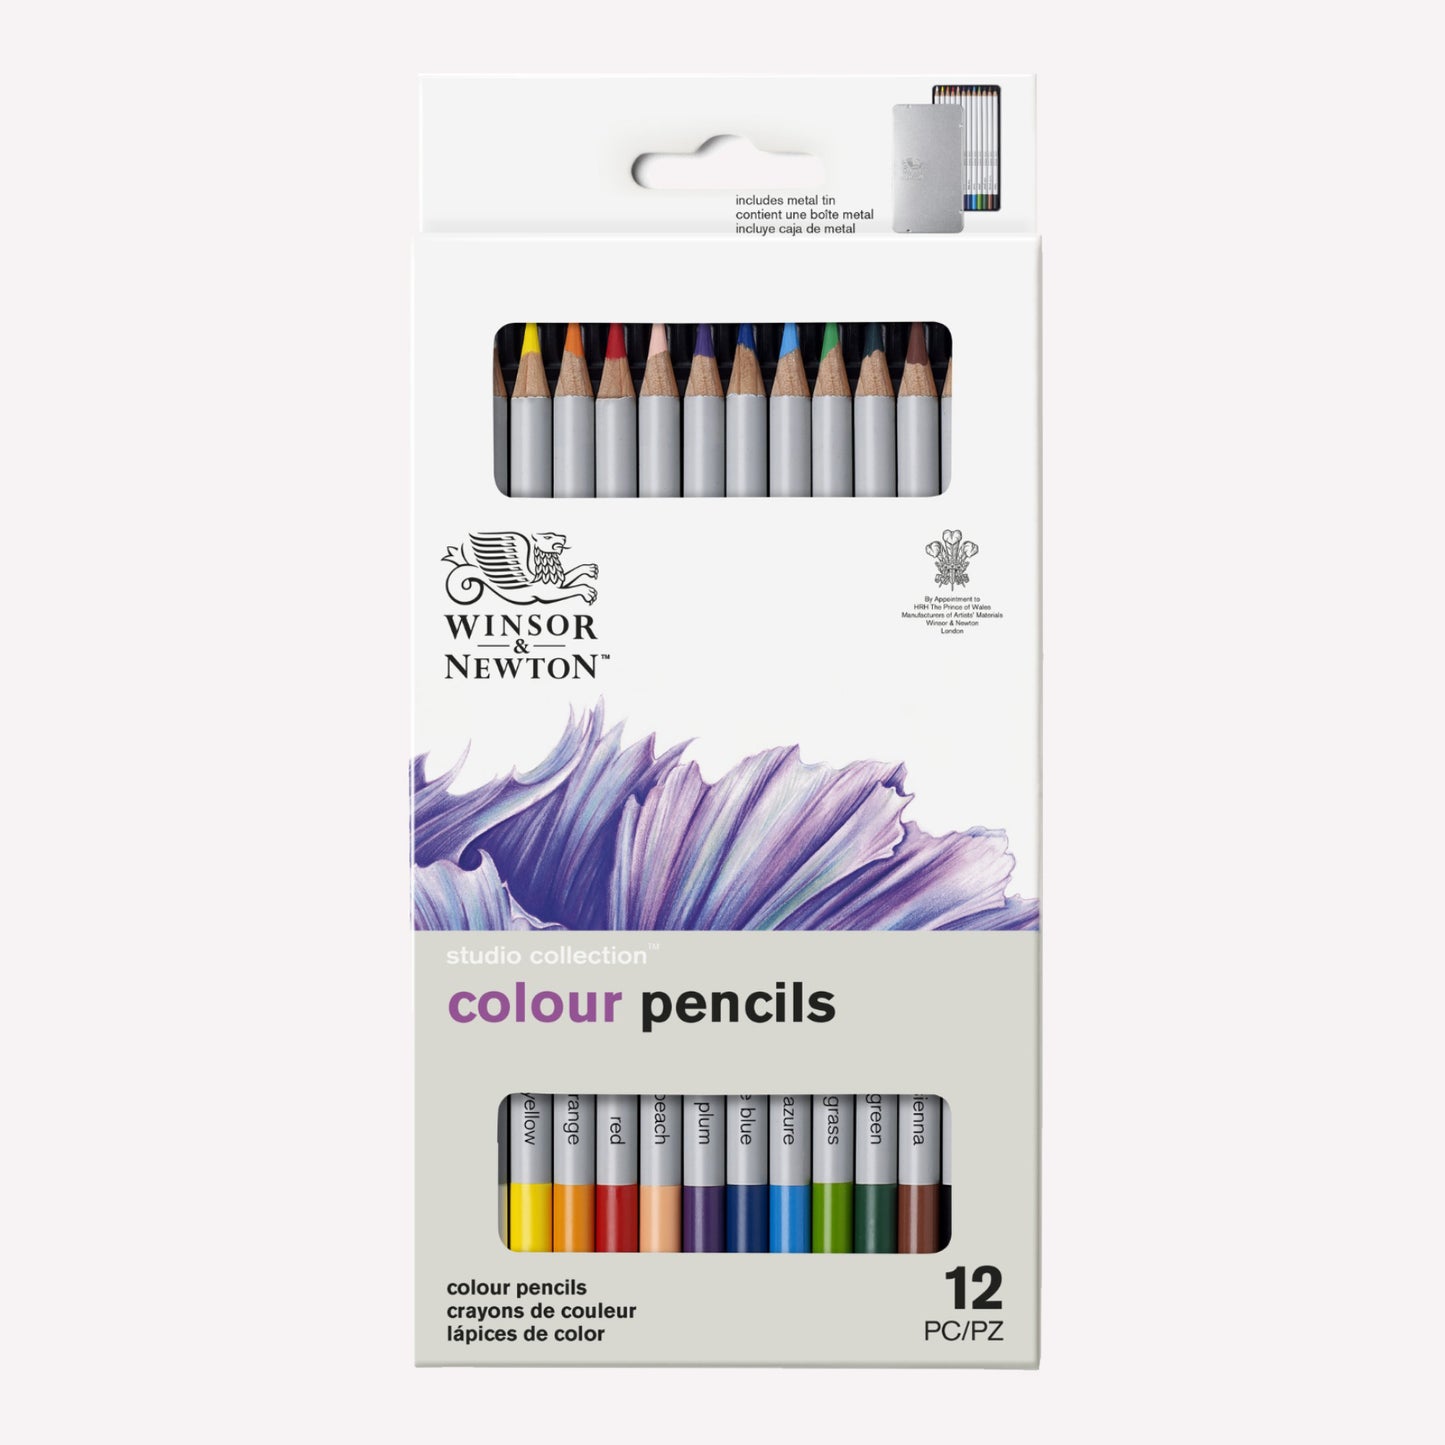 Winsor & Newton's Studio Collection set of 12 colour pencils with a metal tin packaged in a white card box. 